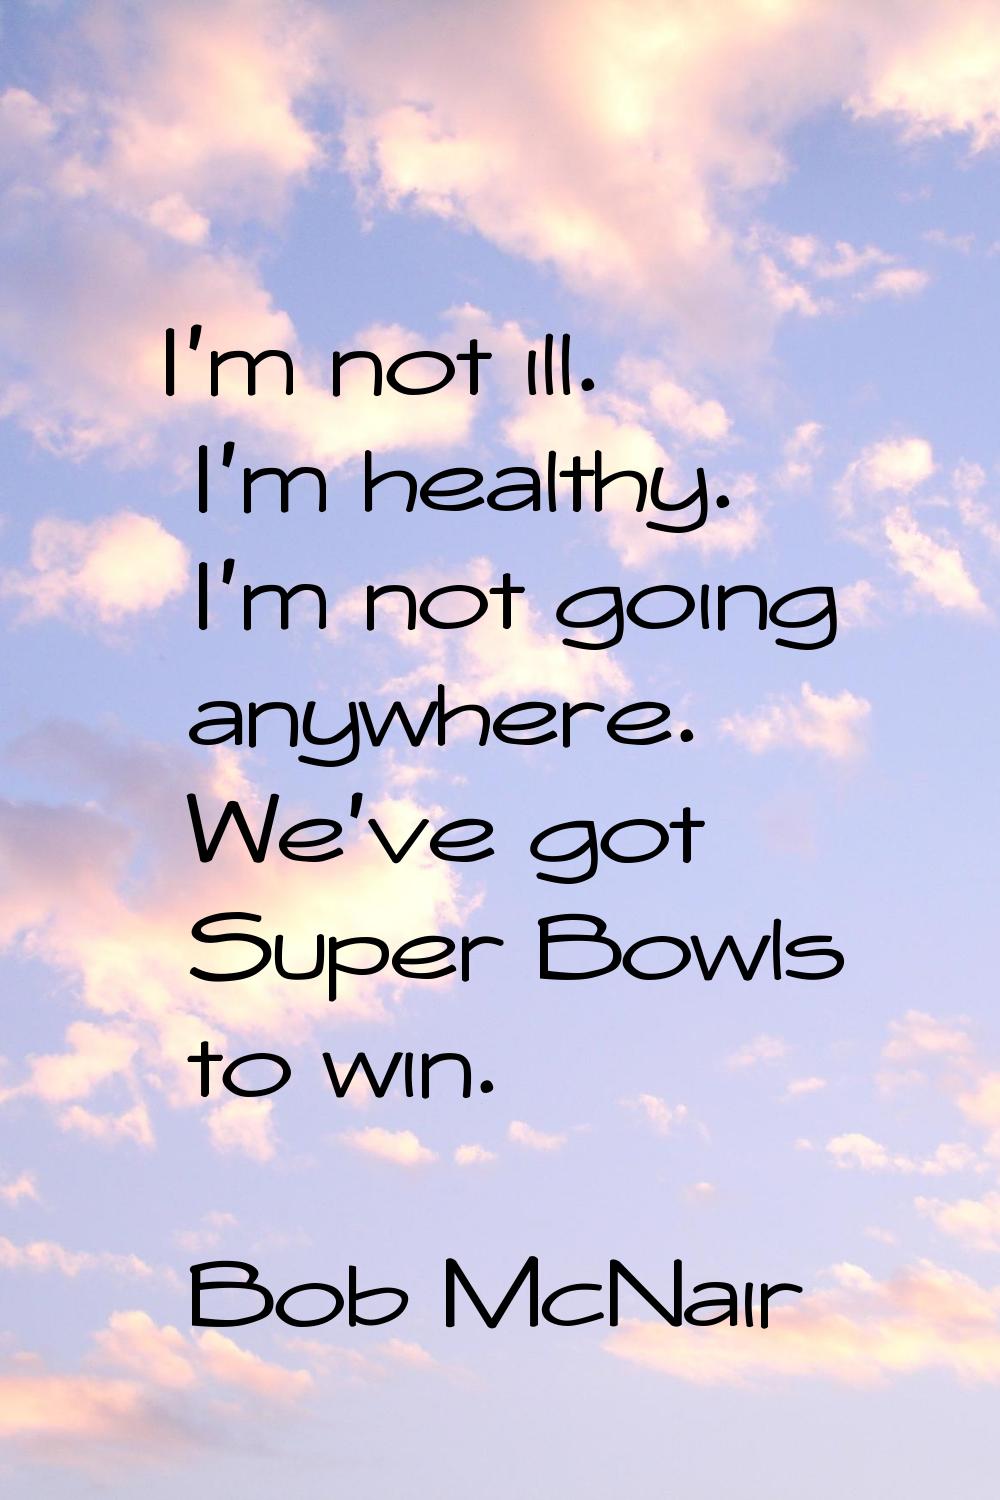 I'm not ill. I'm healthy. I'm not going anywhere. We've got Super Bowls to win.